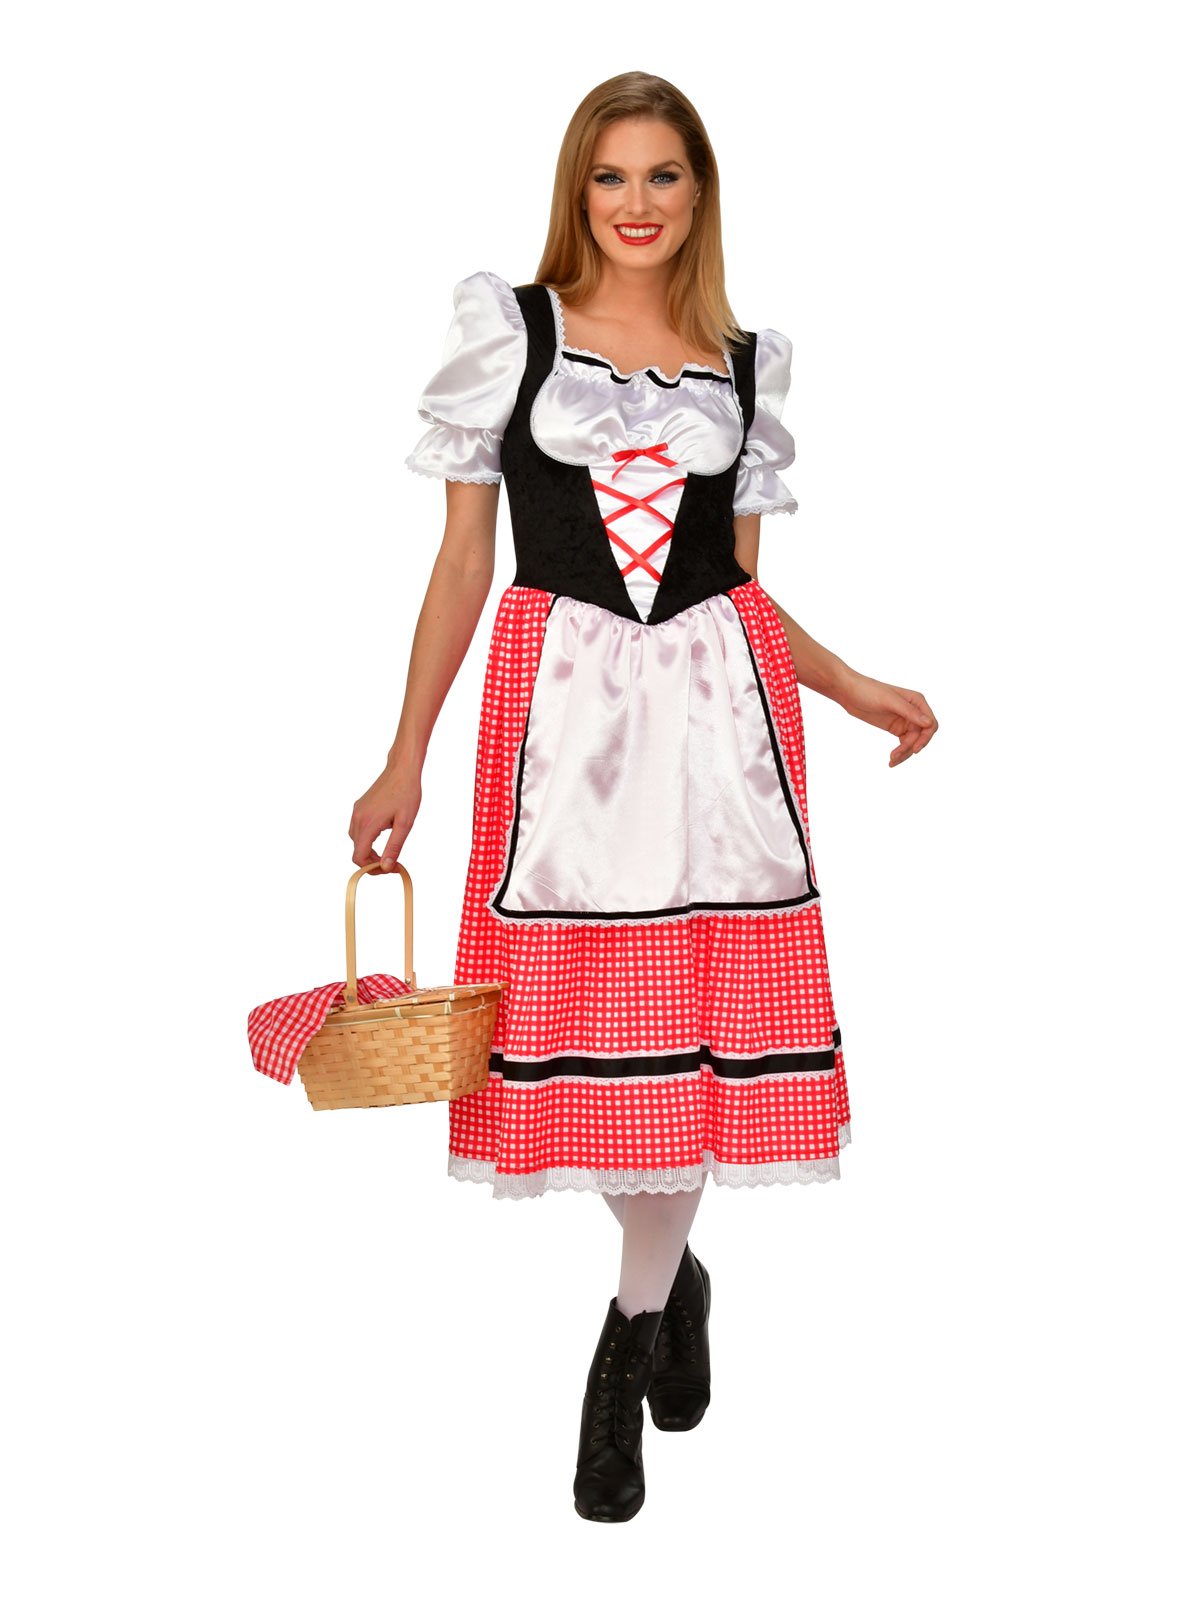 Costume Adult Red Riding Hood Large